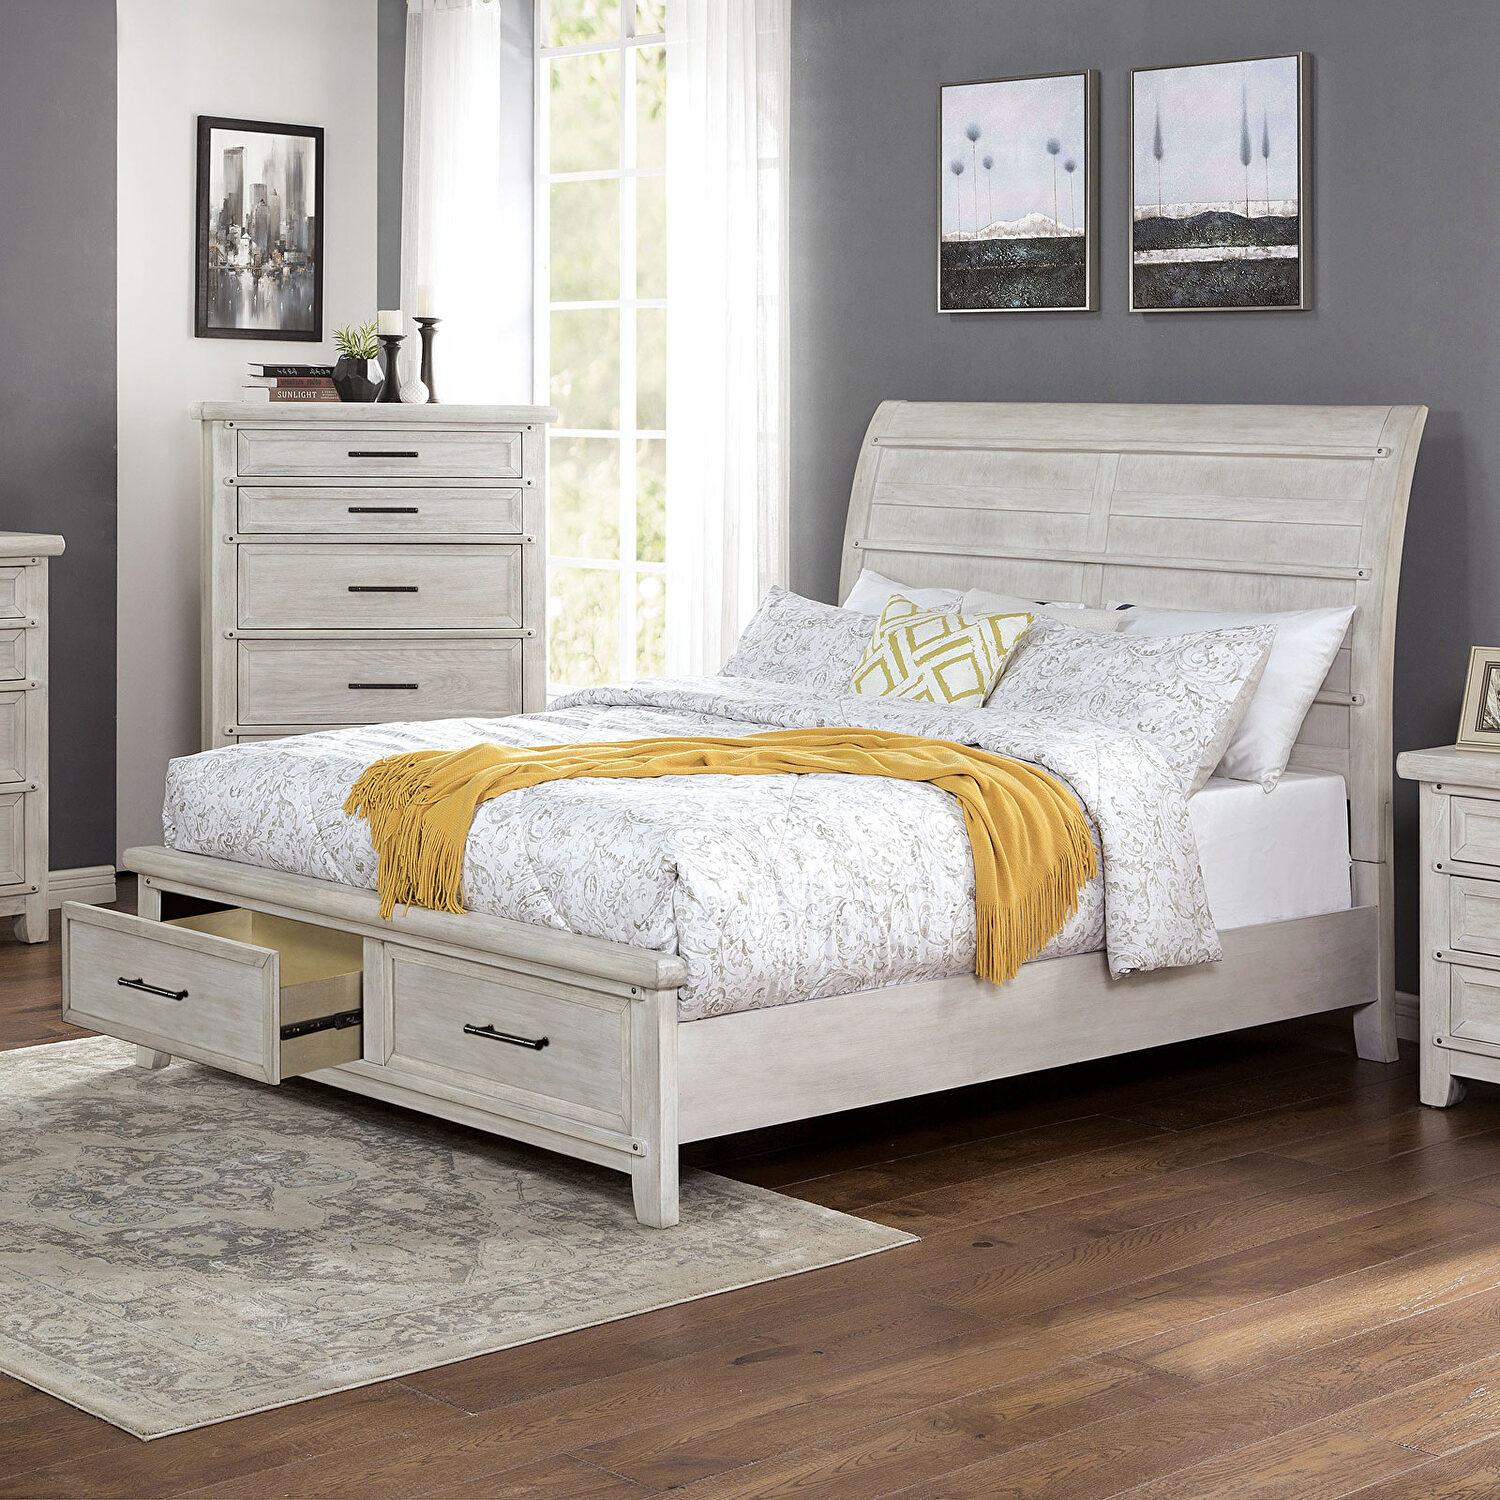 Transitional Storage Bed FOA7924-Q Shawnette FOA7924-Q in Antique White 